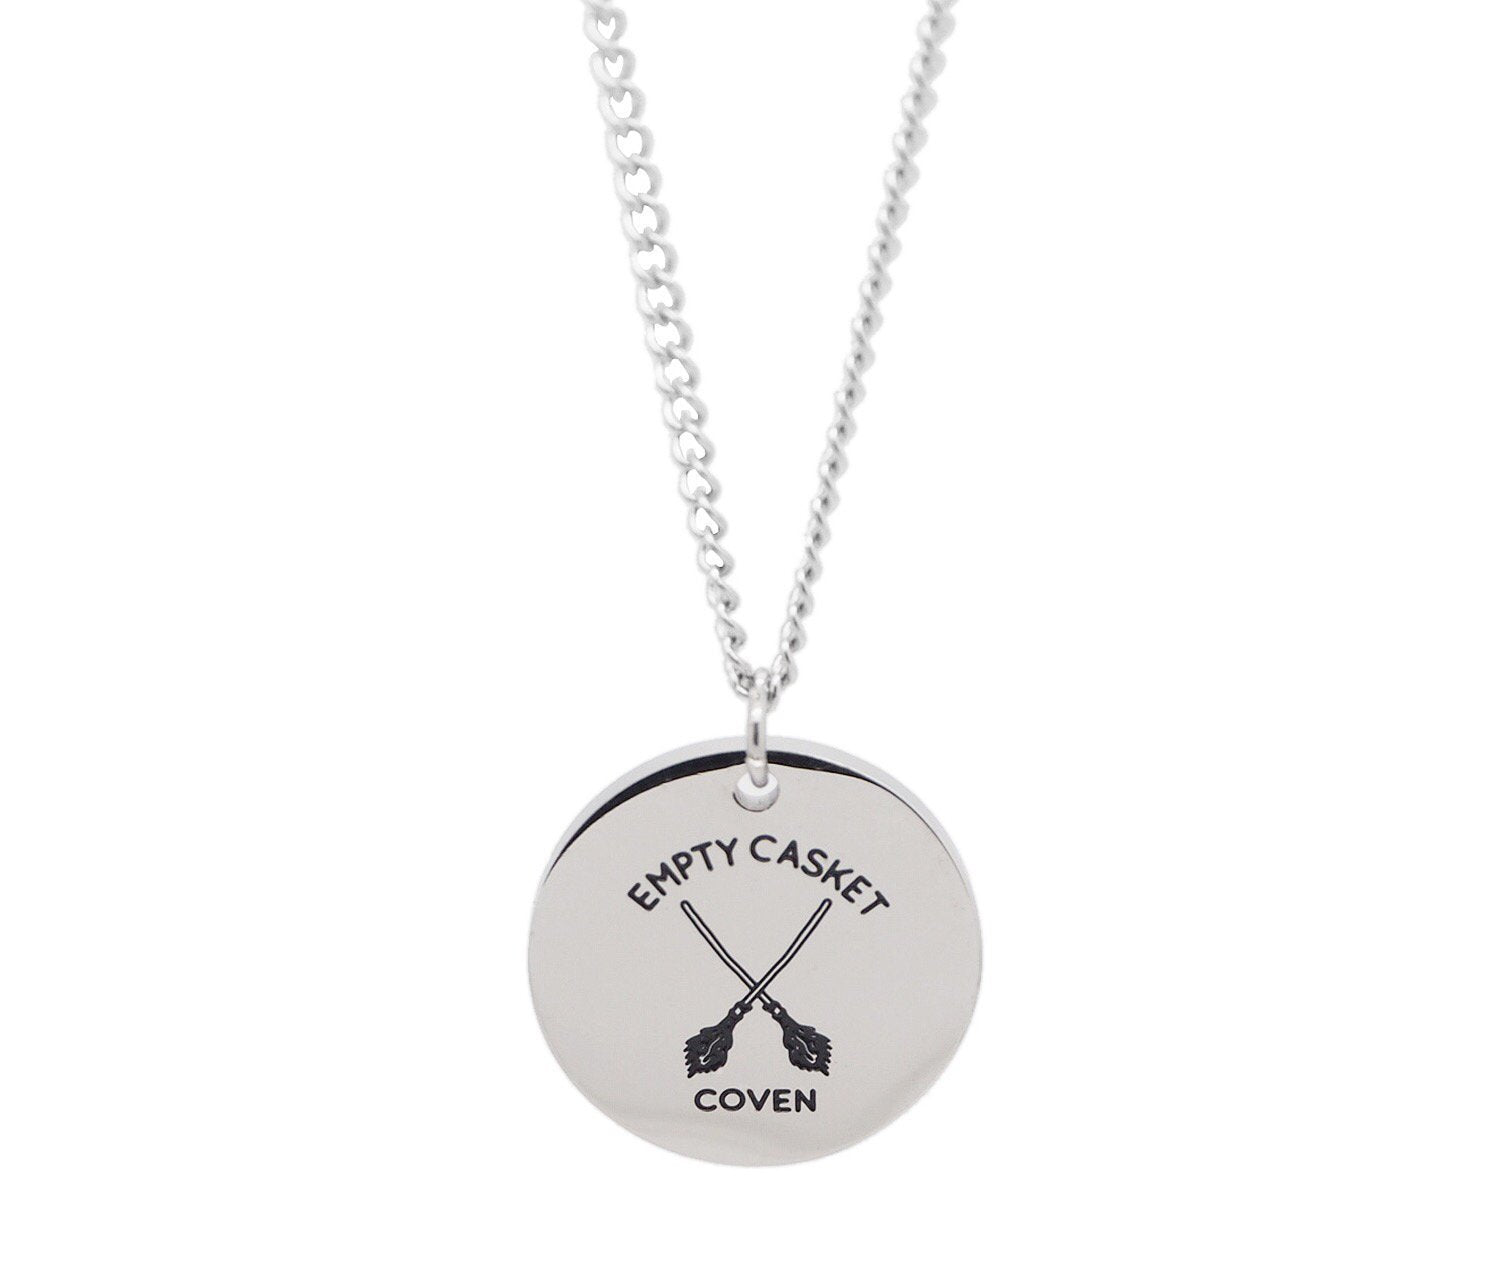 Coven Necklace